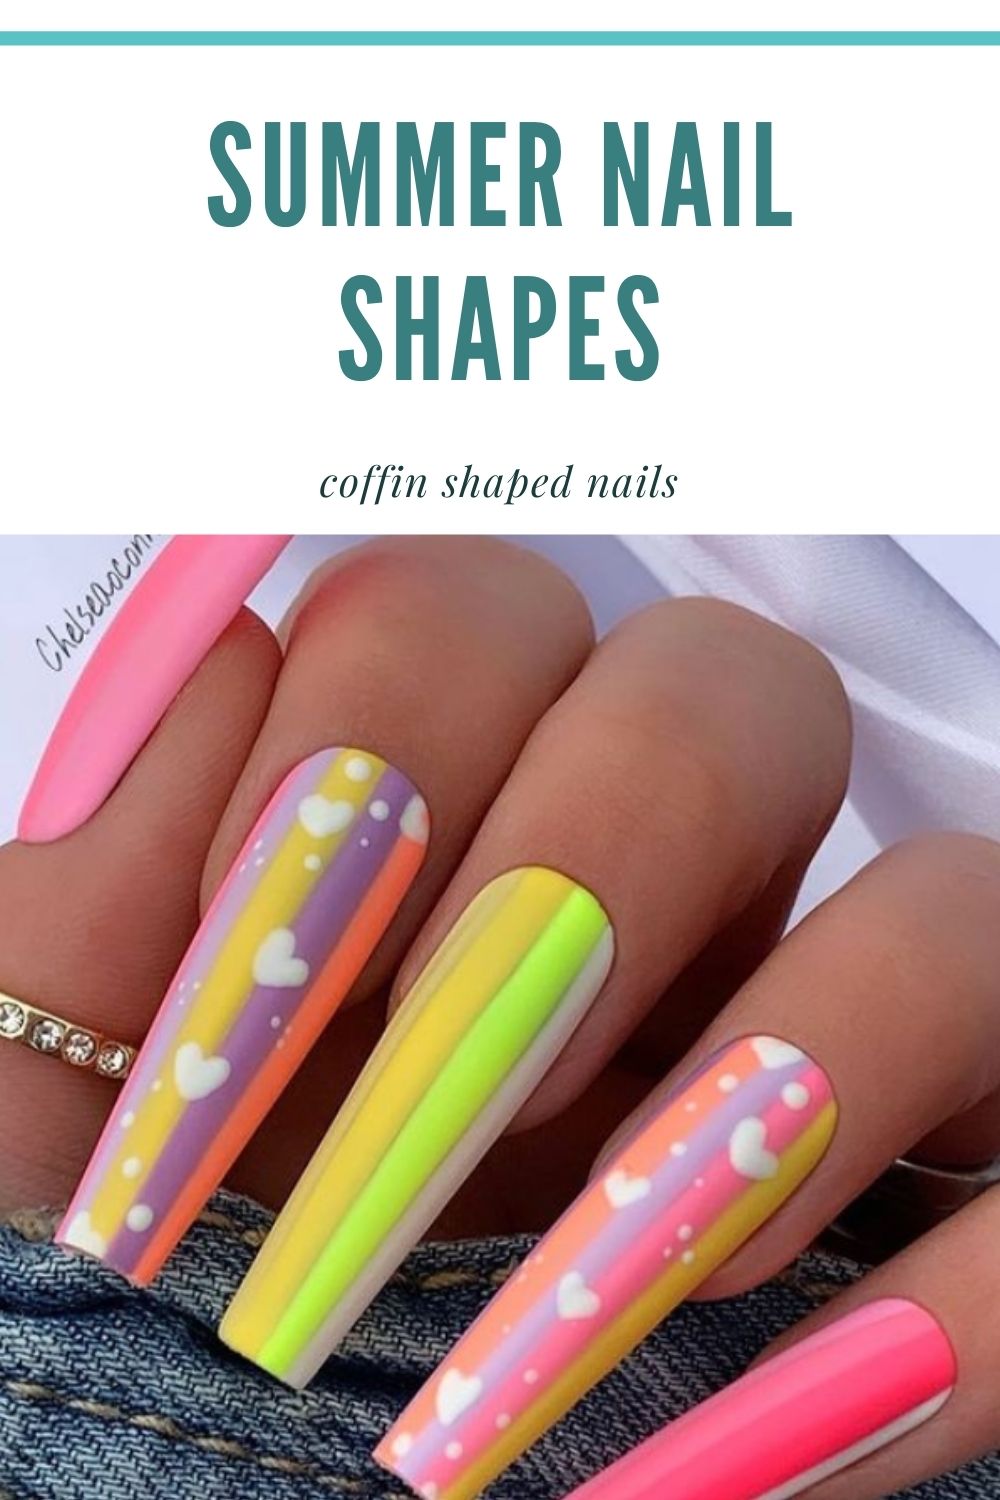 30 Beautiful acrylic coffin nail designs for Summer nail trends 2021!